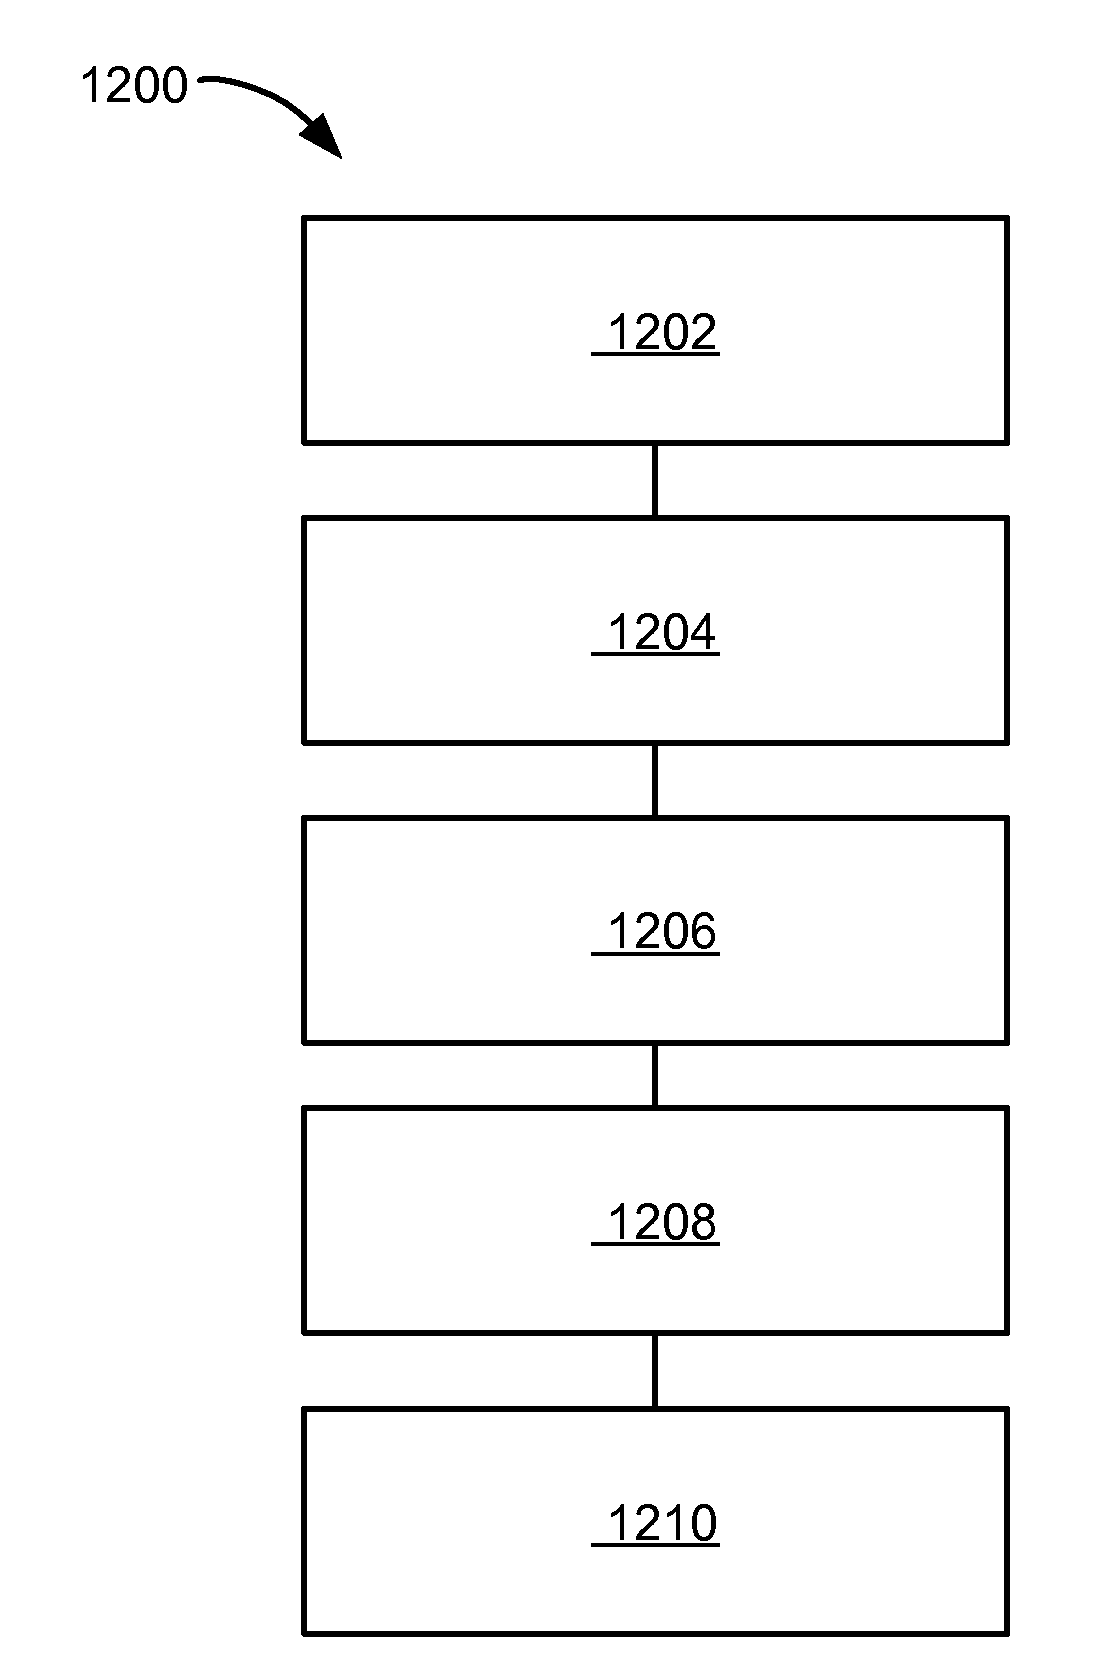 Integrated circuit tester information processing system for nonlinear mobility model for strained device